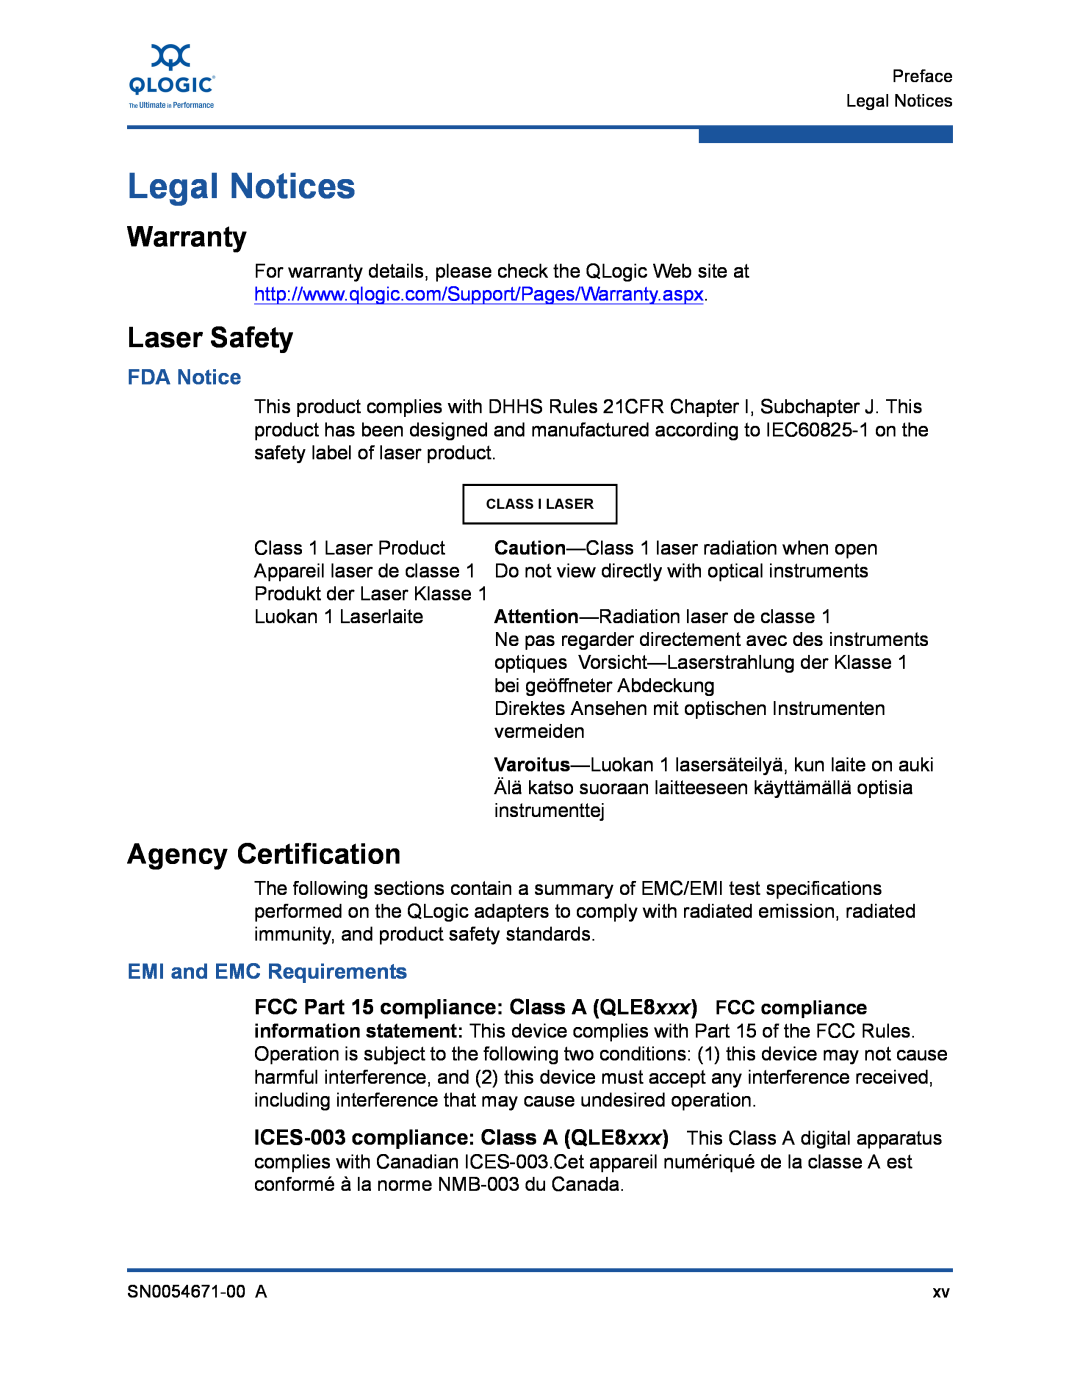 Q-Logic 3200, 8200 manual Legal Notices, Warranty, Laser Safety, Agency Certification, FDA Notice, EMI and EMC Requirements 